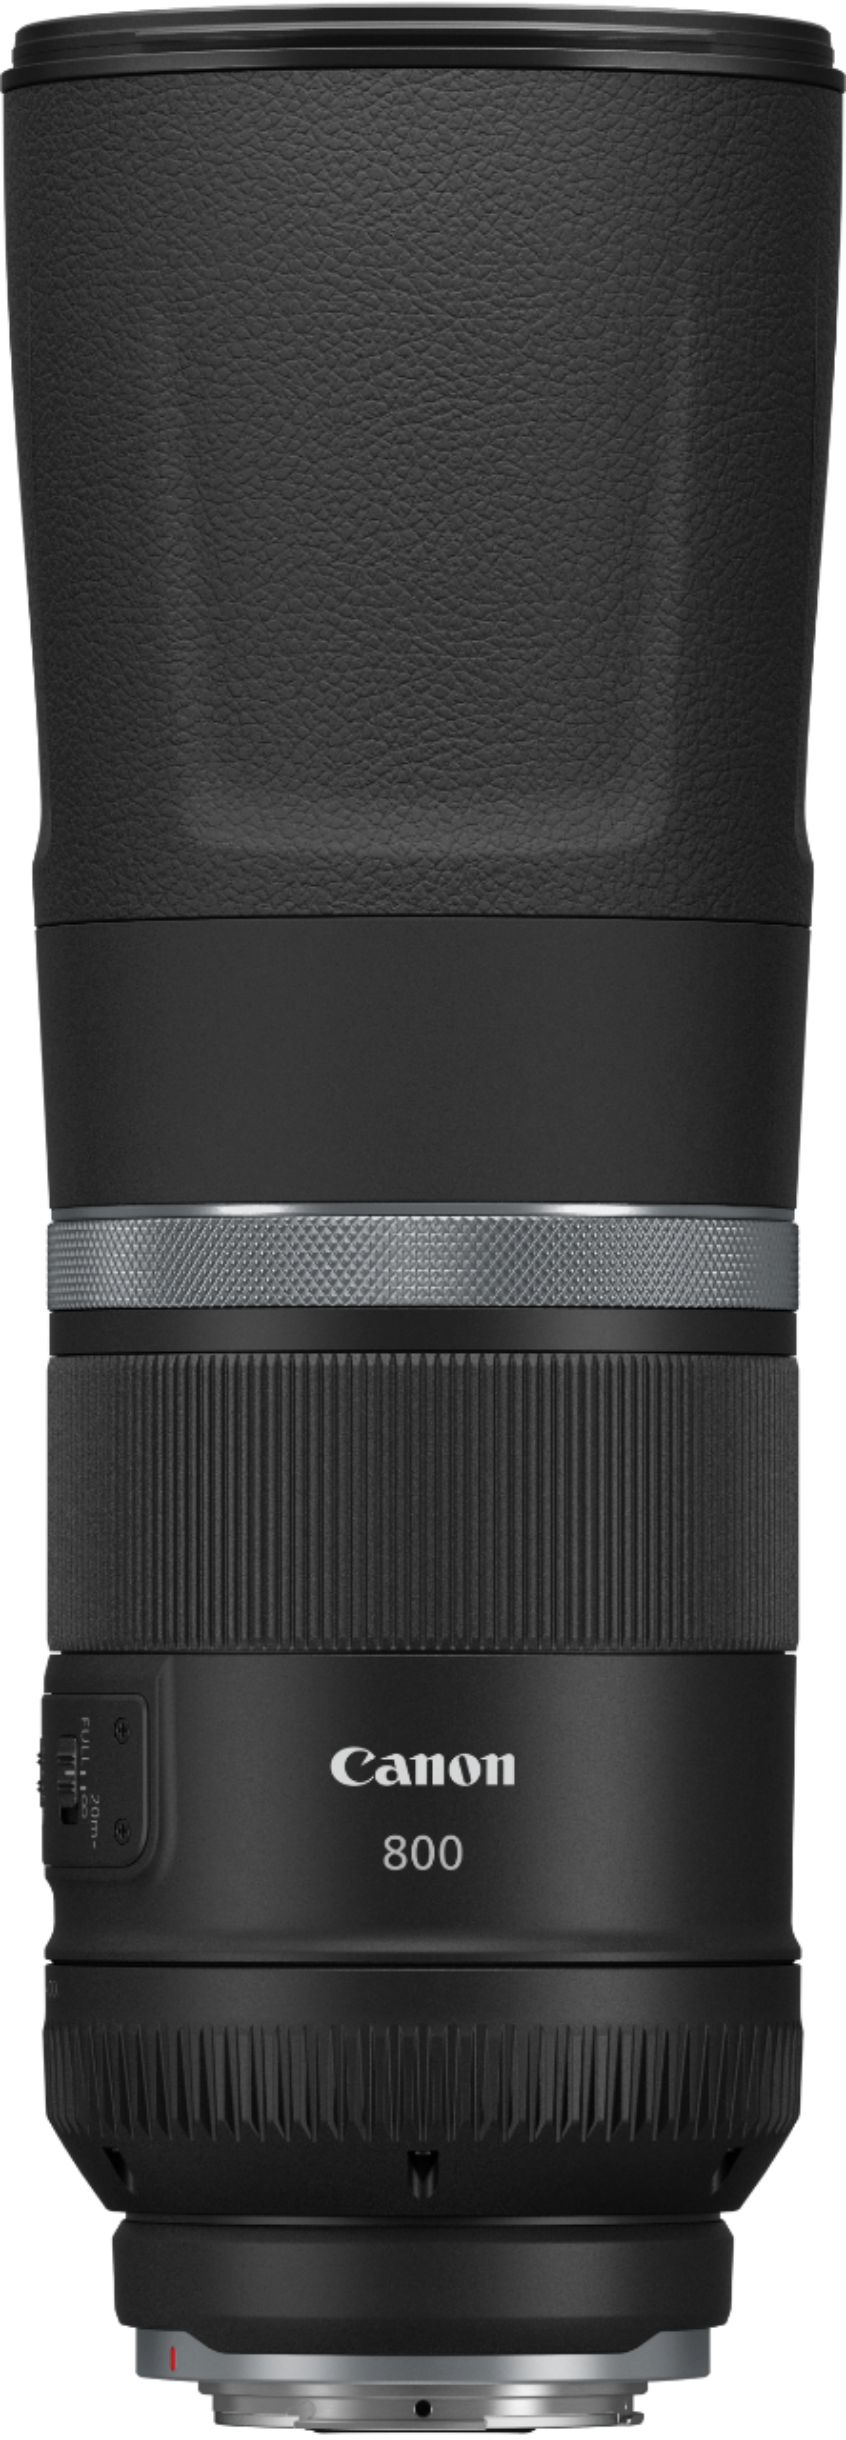 Left View: Canon - RF800mm F11  IS STM Telephoto Lens for EOS R-Series Cameras - Black